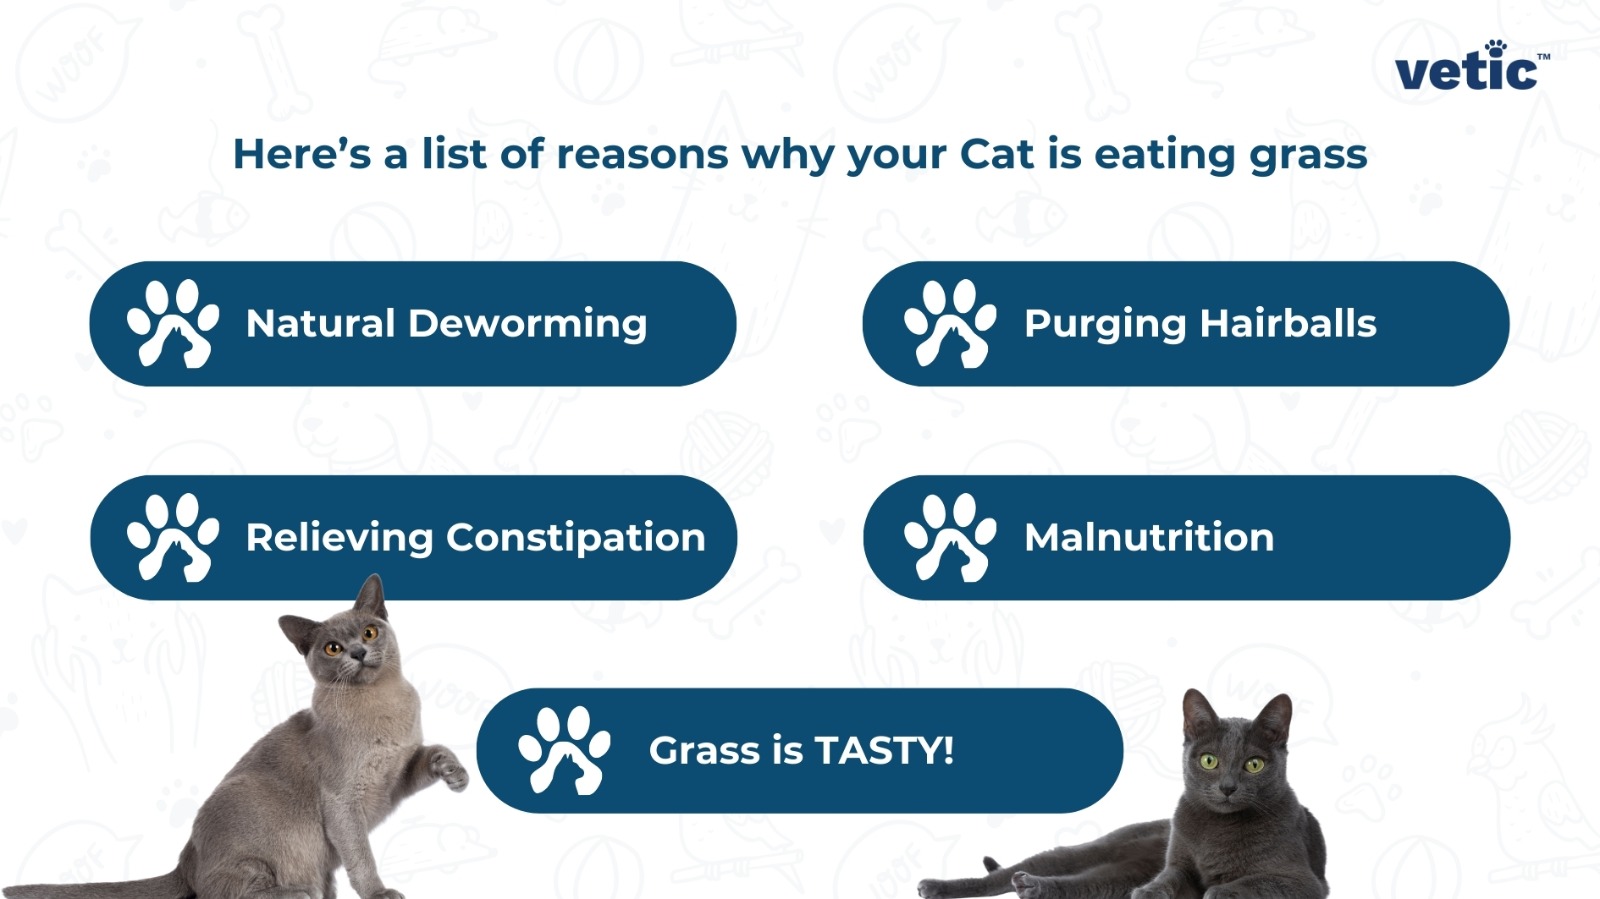 Copyright infographic by Vetic stating "Here's a list of reasons why your cat is eating grass. Natural Deworming Purging Hairballs Relieving Constipation Malnutrition Grass is TASTY! In case your cat is eating grass almost compulsively, don't forget to consult your vet at Vetic Mumbai